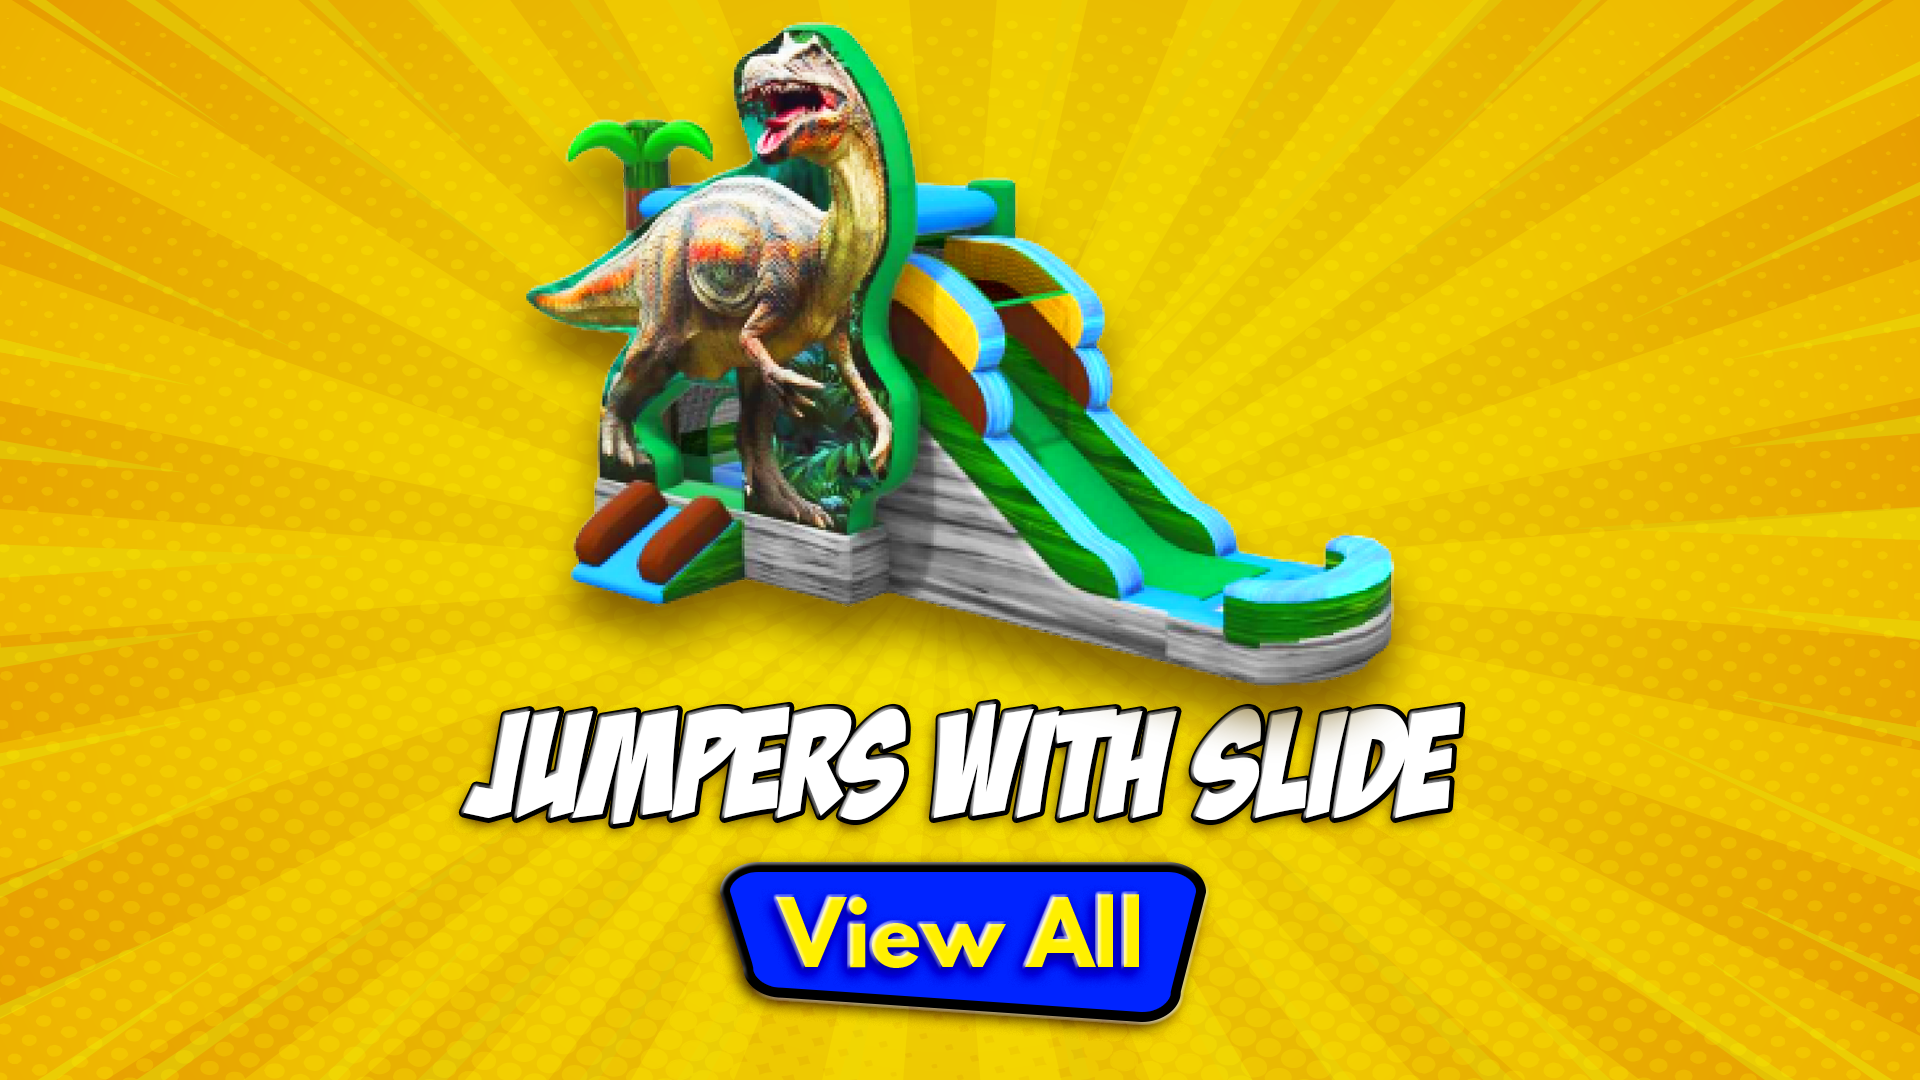 jumpers with slide rentals